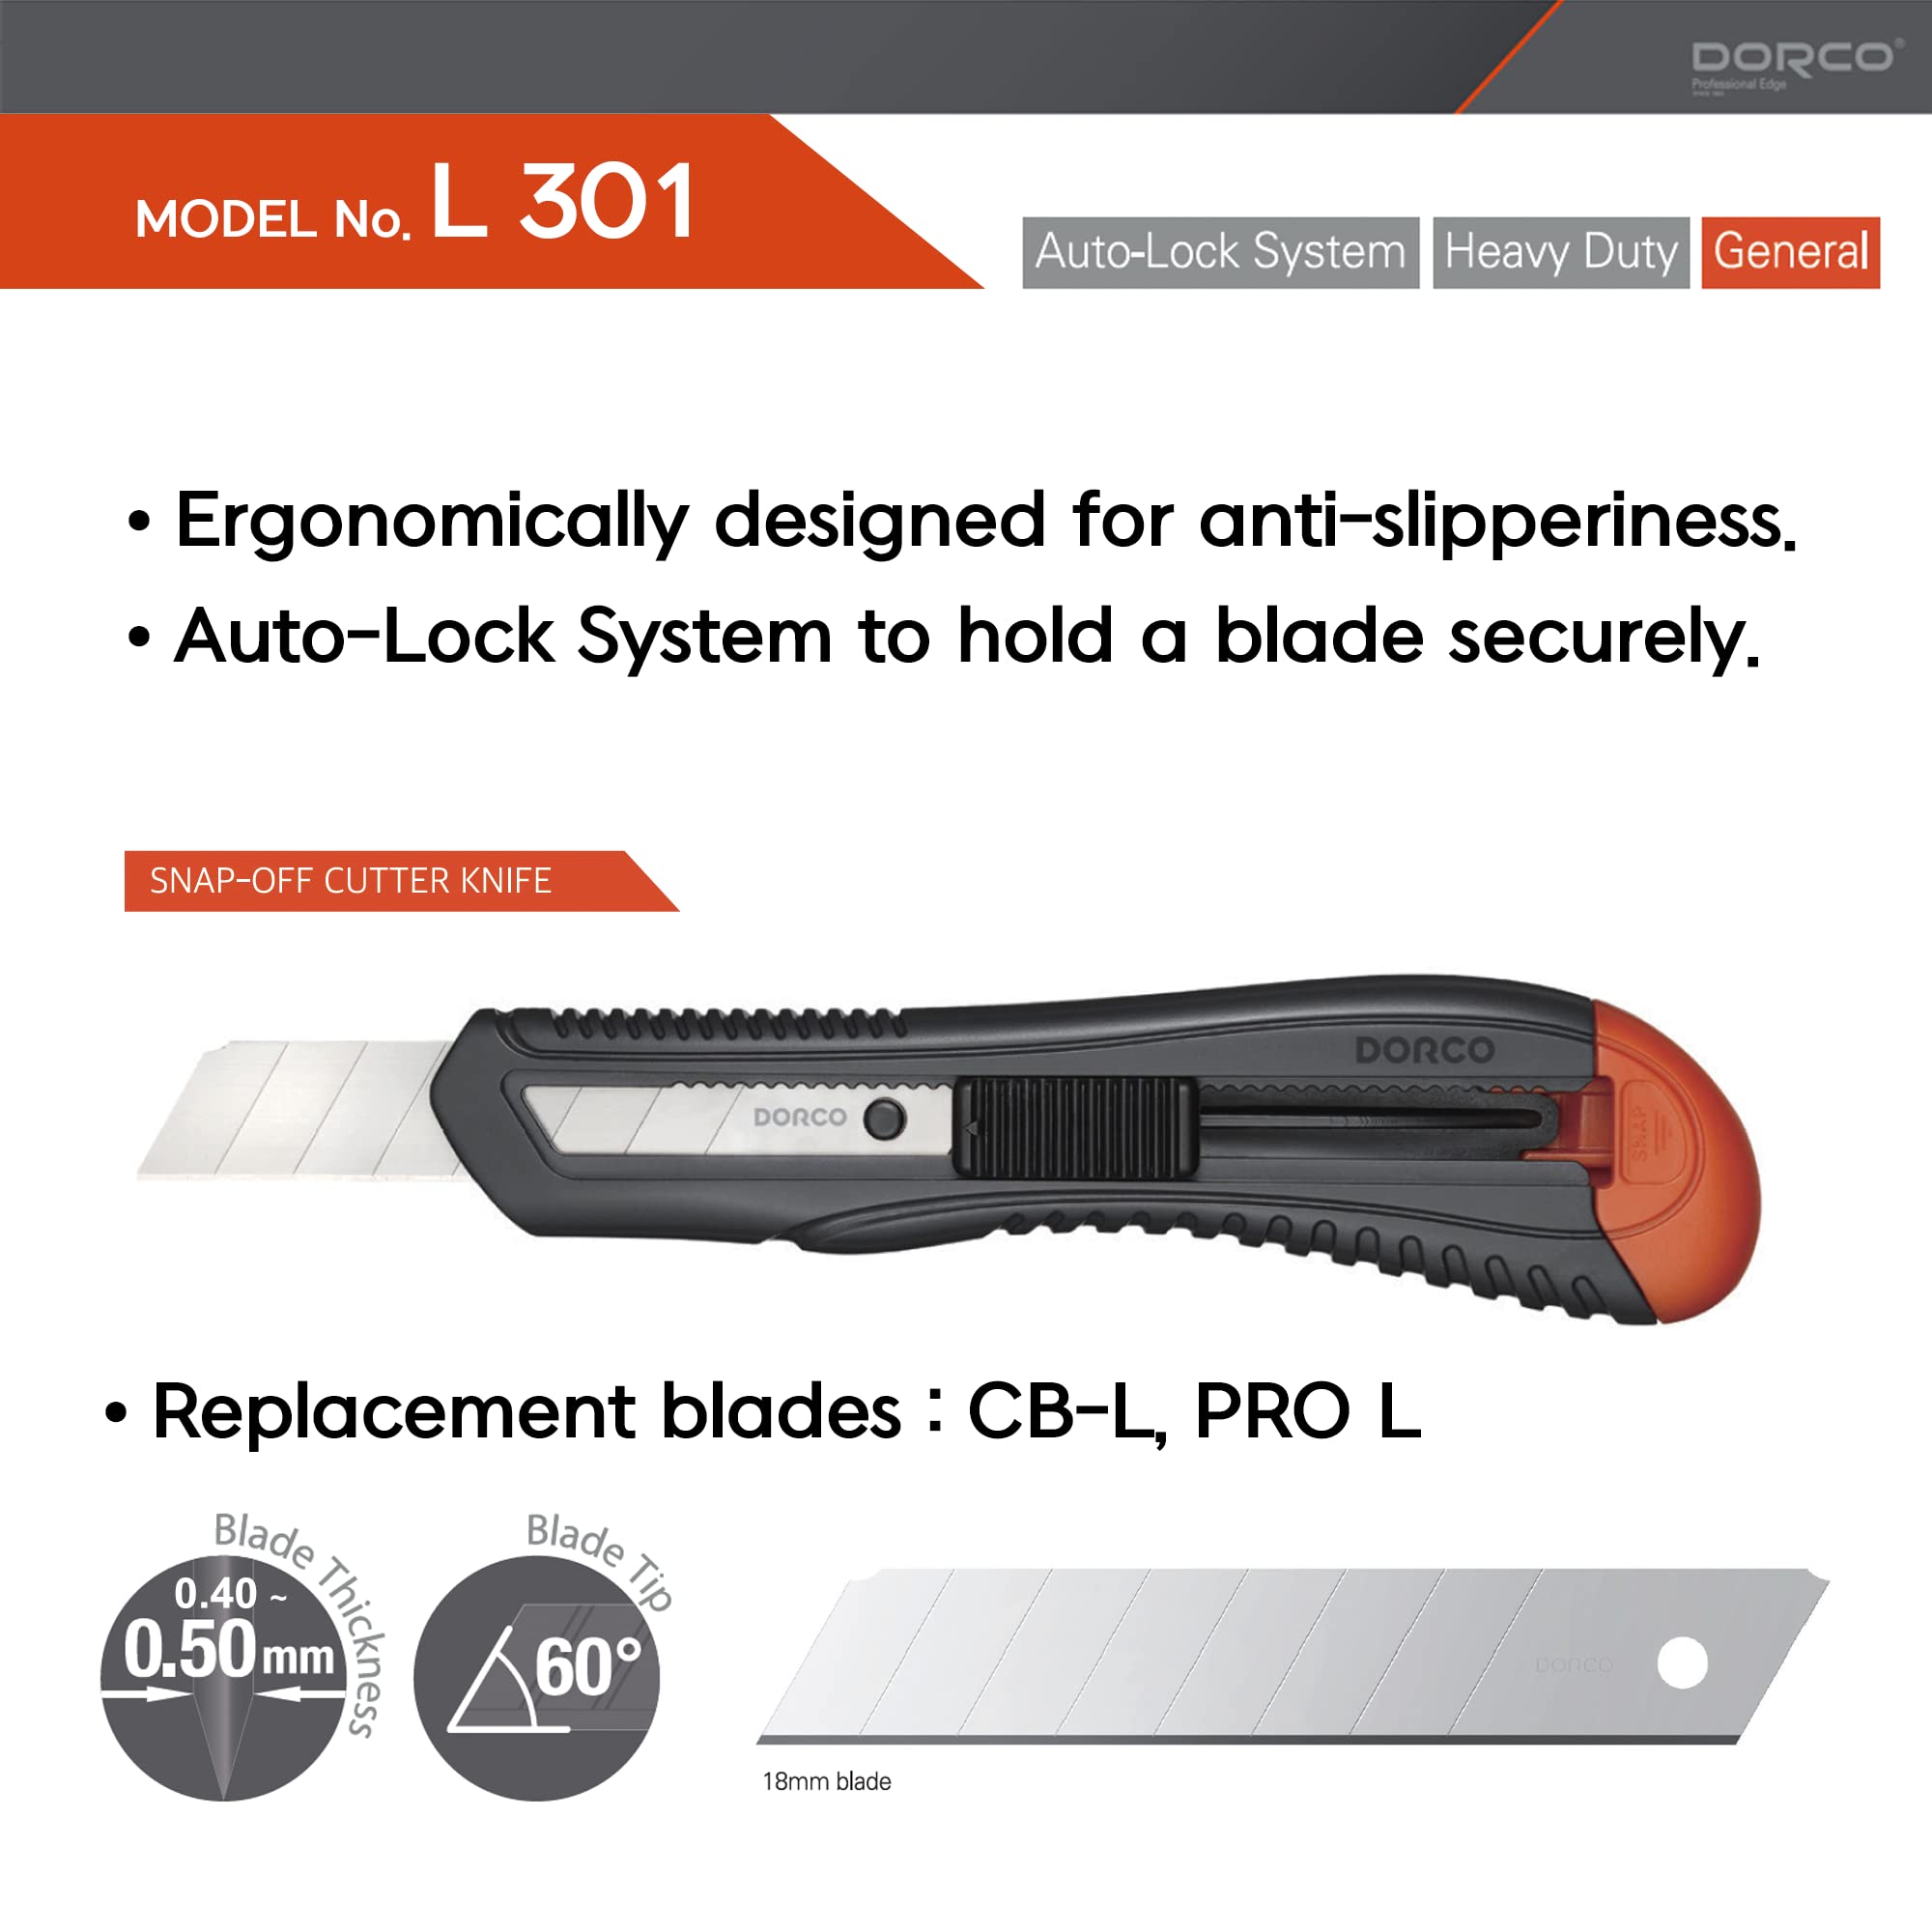 10 Pcs, DORCO Professional Quality Utility Box Cutter Knife L301 - Auto-Lock Safety System, Large Design, Retractable, Built-In Snap-Off Tool, Replaceable Carbon Steel Blade - 18mm